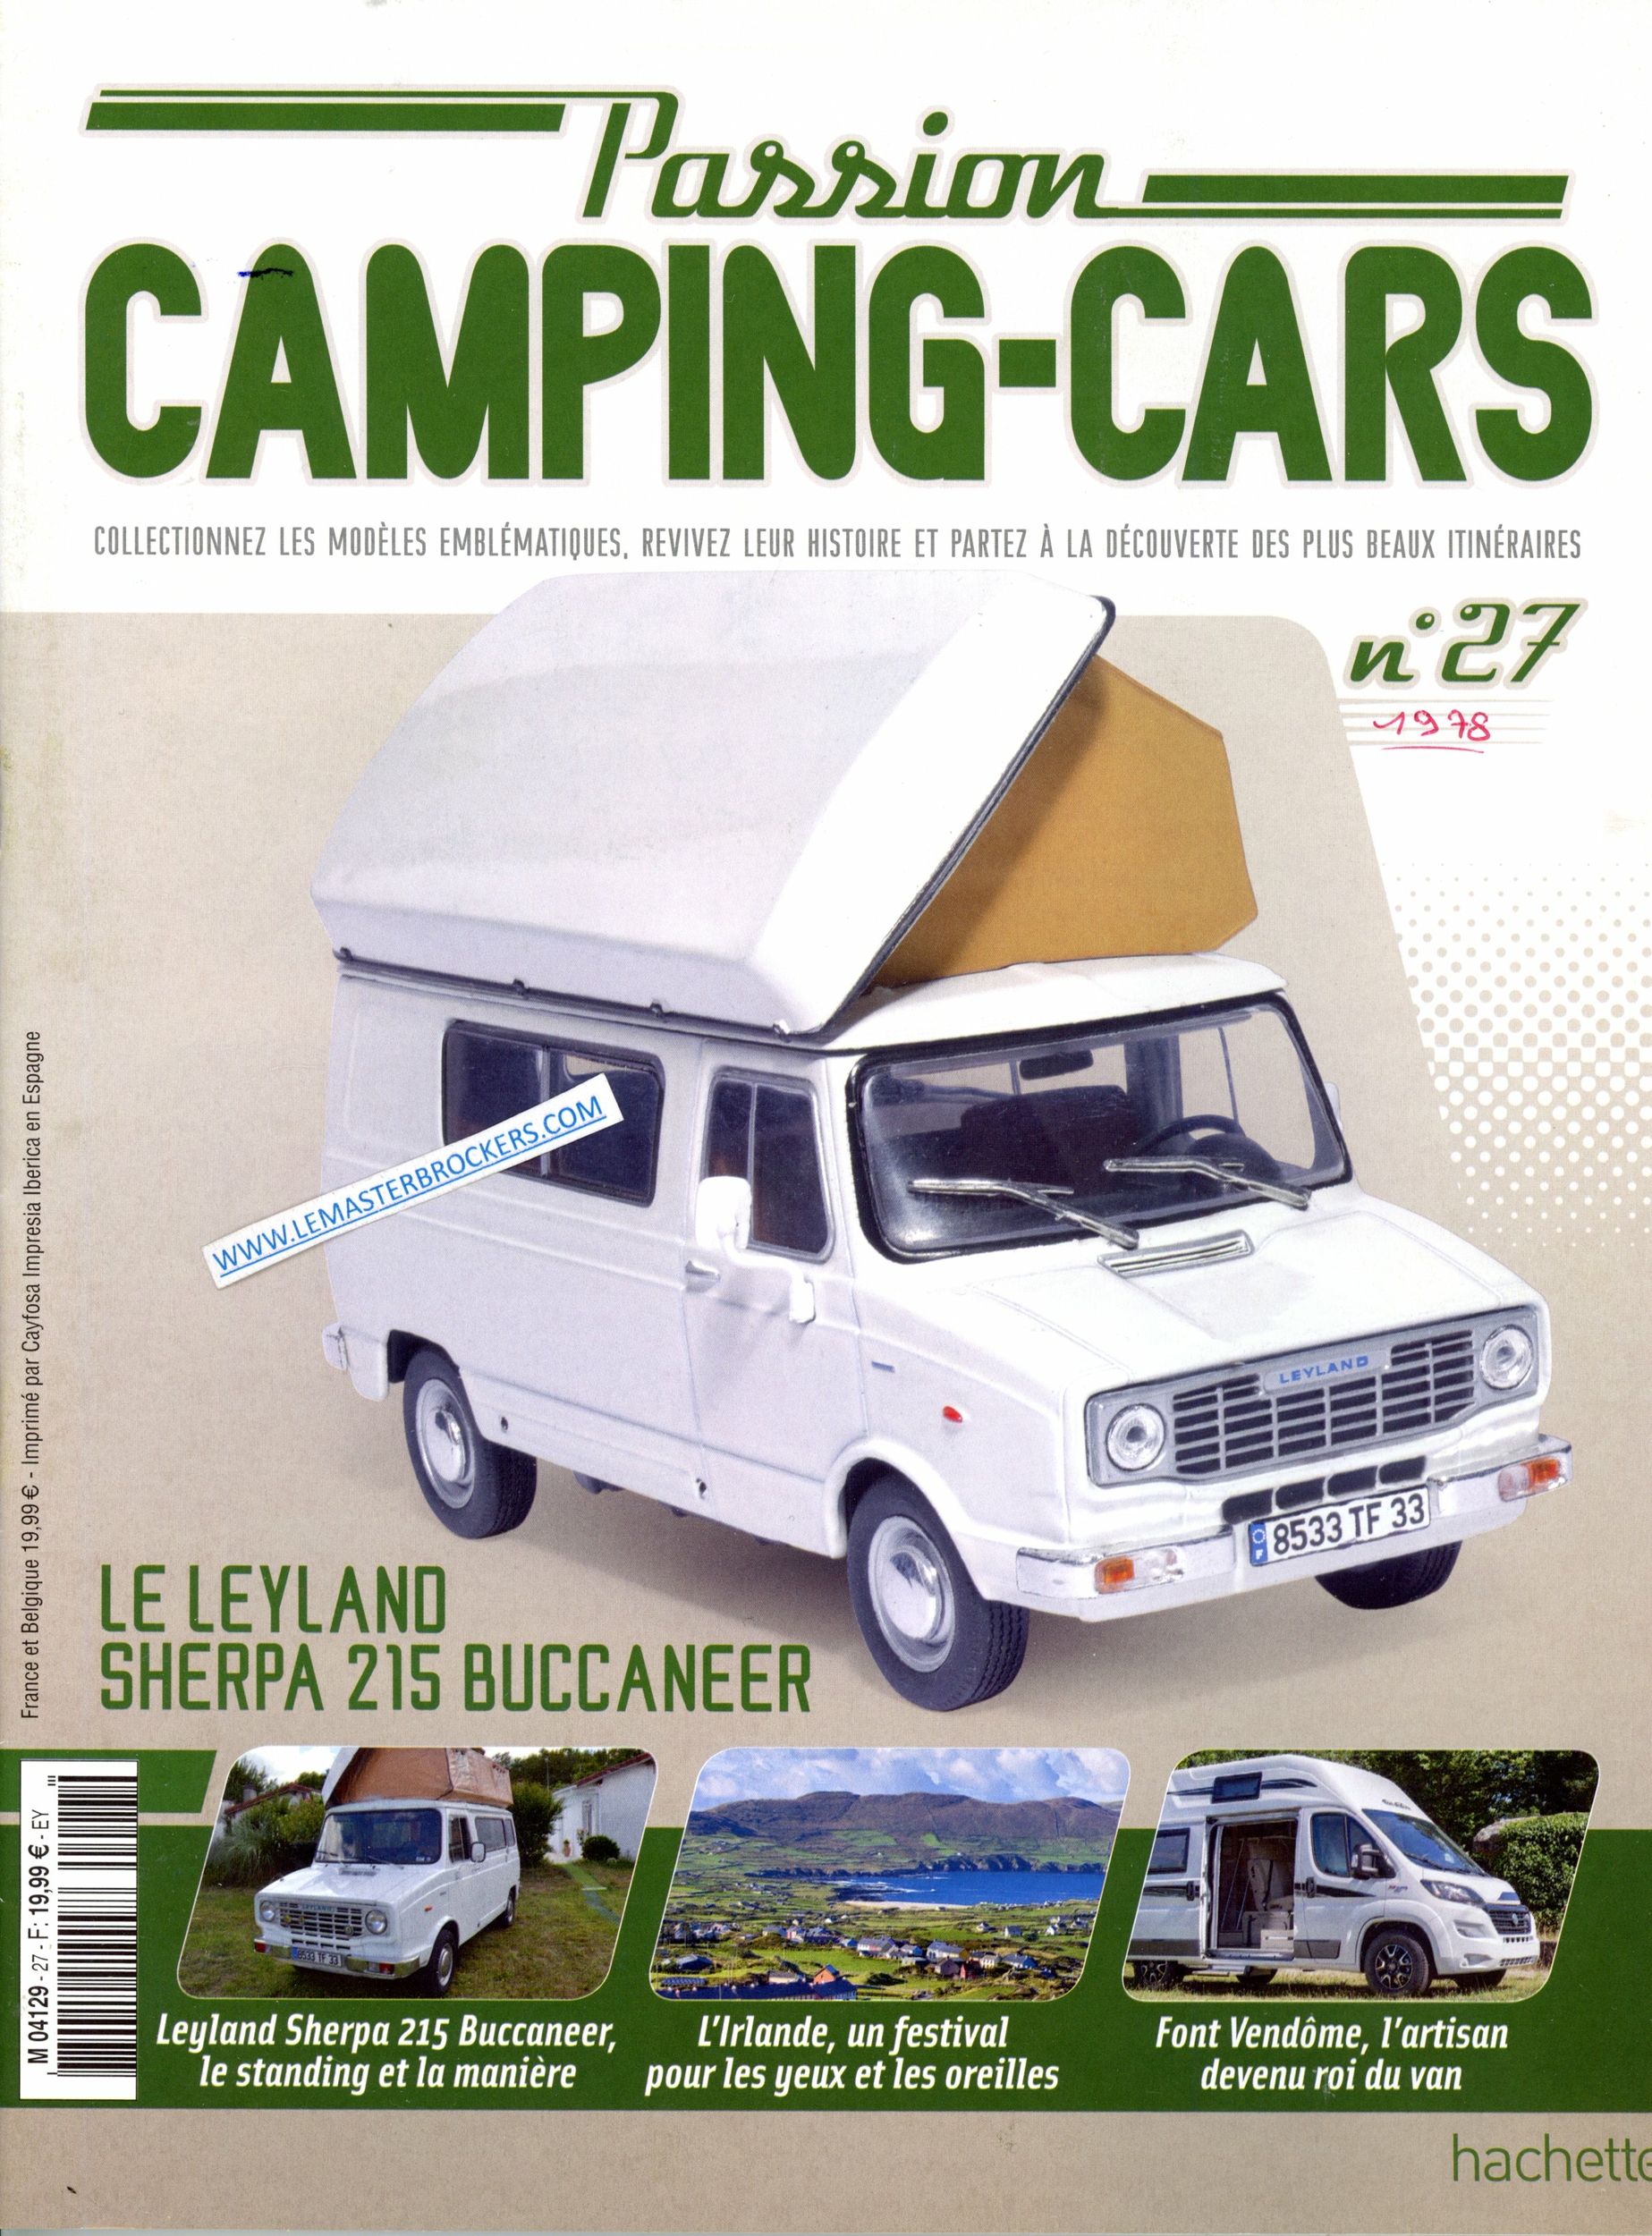 LEYLAND SHERPA 215 BUCCANEER PASSION CAMPING-CARS